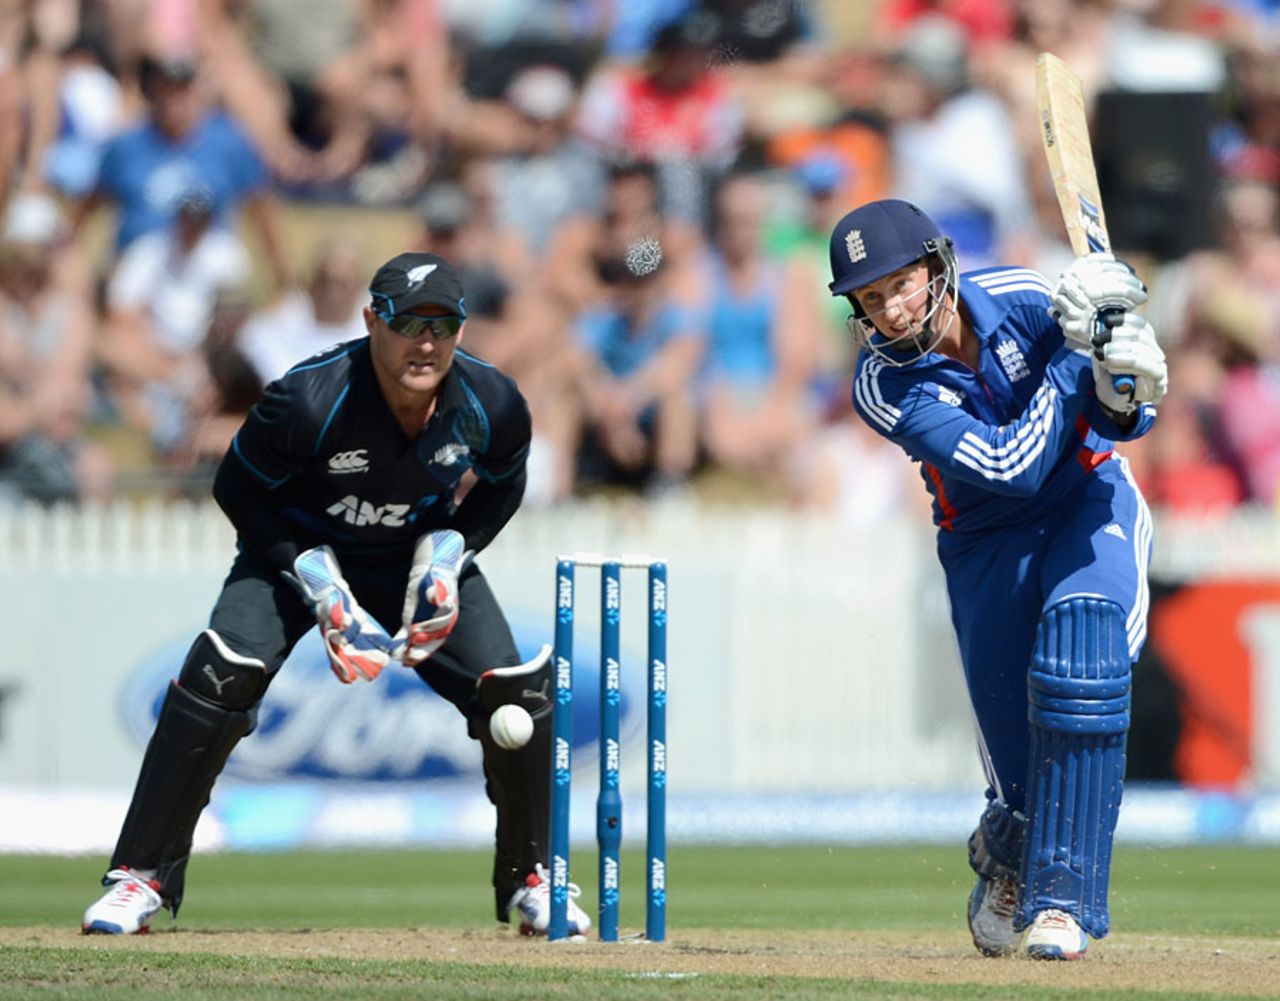 Joe Root placed the ball well during his innings, New Zealand v England, 1st ODI, Hamilton, February 17, 2013